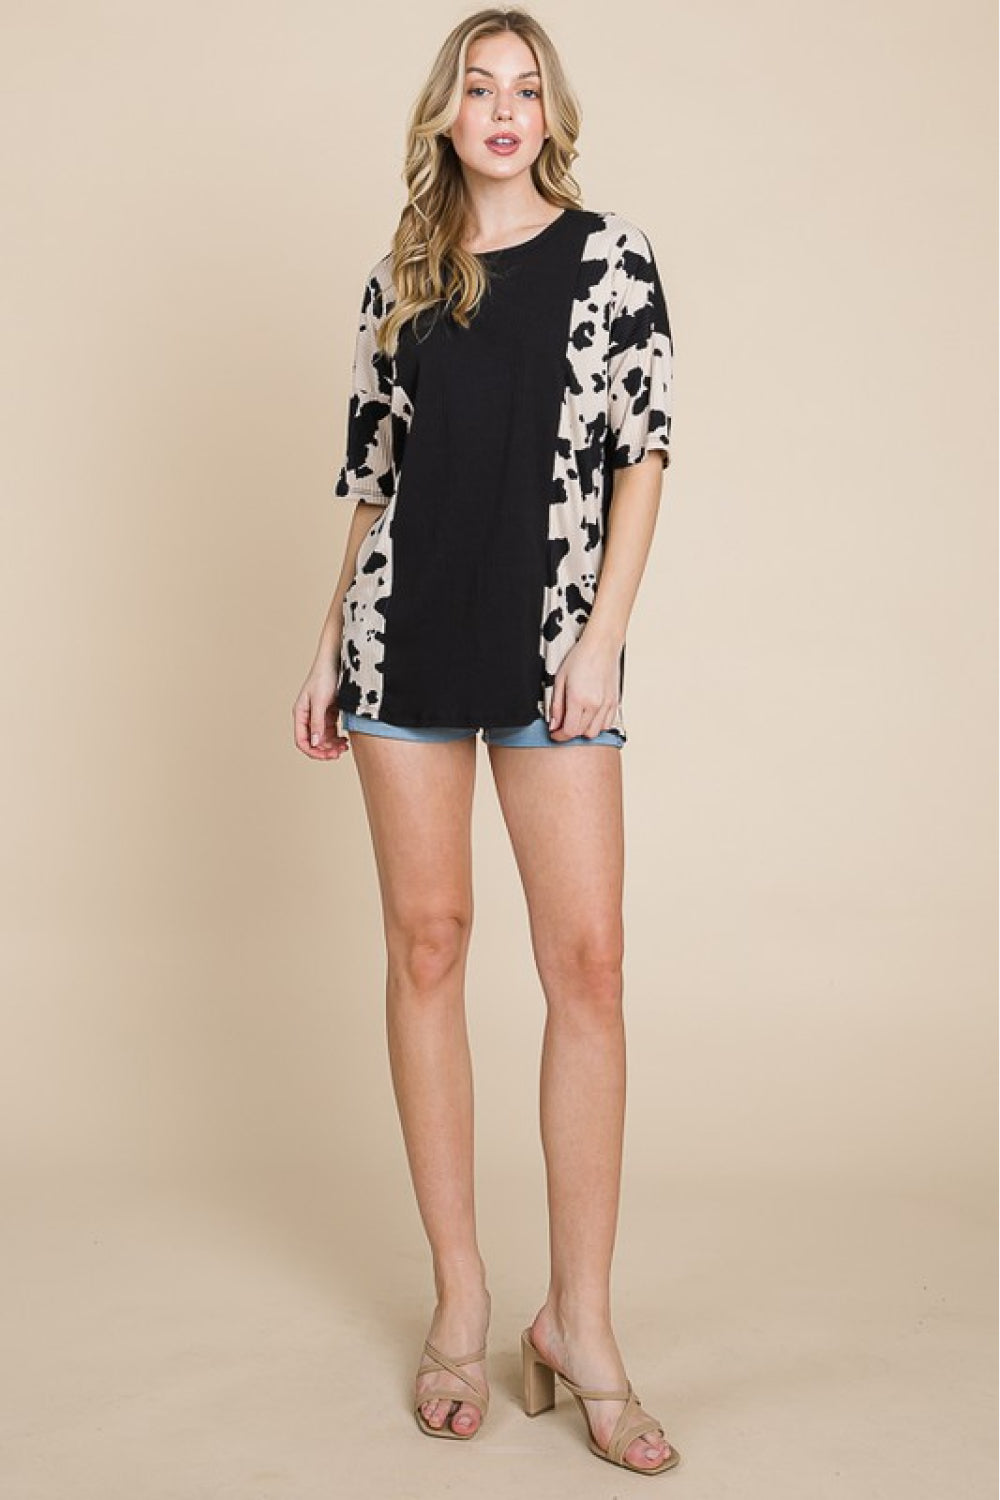 Cow Print Ribbed Contrast Tee, Animal Print, High Stretch